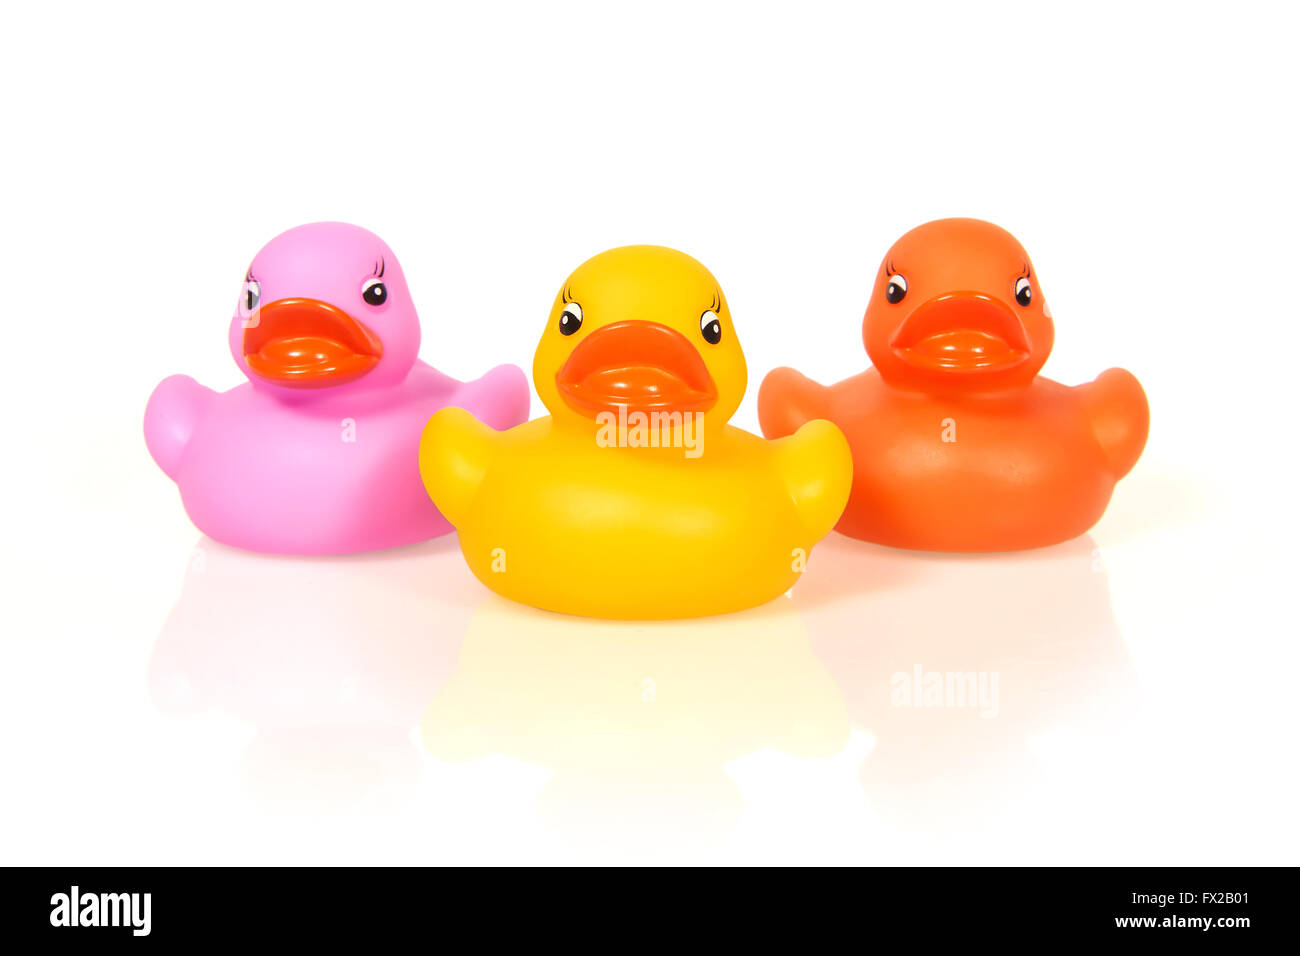 Colorful rubber ducks with big lips on a white background Stock Photo